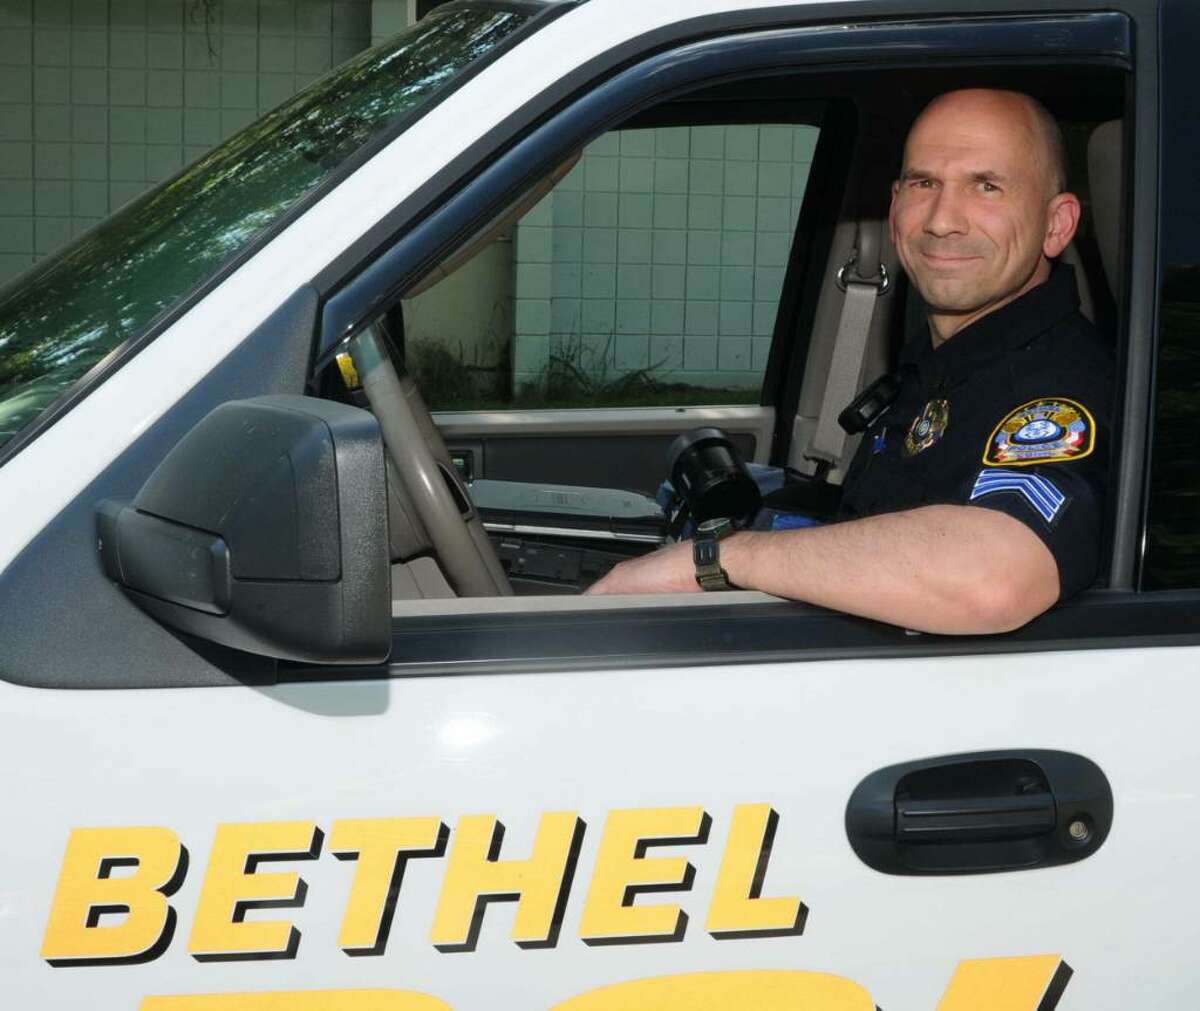 Bethel police officer, Sgt. Keith Mackenzie, in a police cruiser, at the Bethel Police Department, on Wednesday, May 5, 2010. Mackenzie has been named Bethel Police Officer of the Year by the Danbury Exchange Club, in conjuction with the Bethel Police Department.